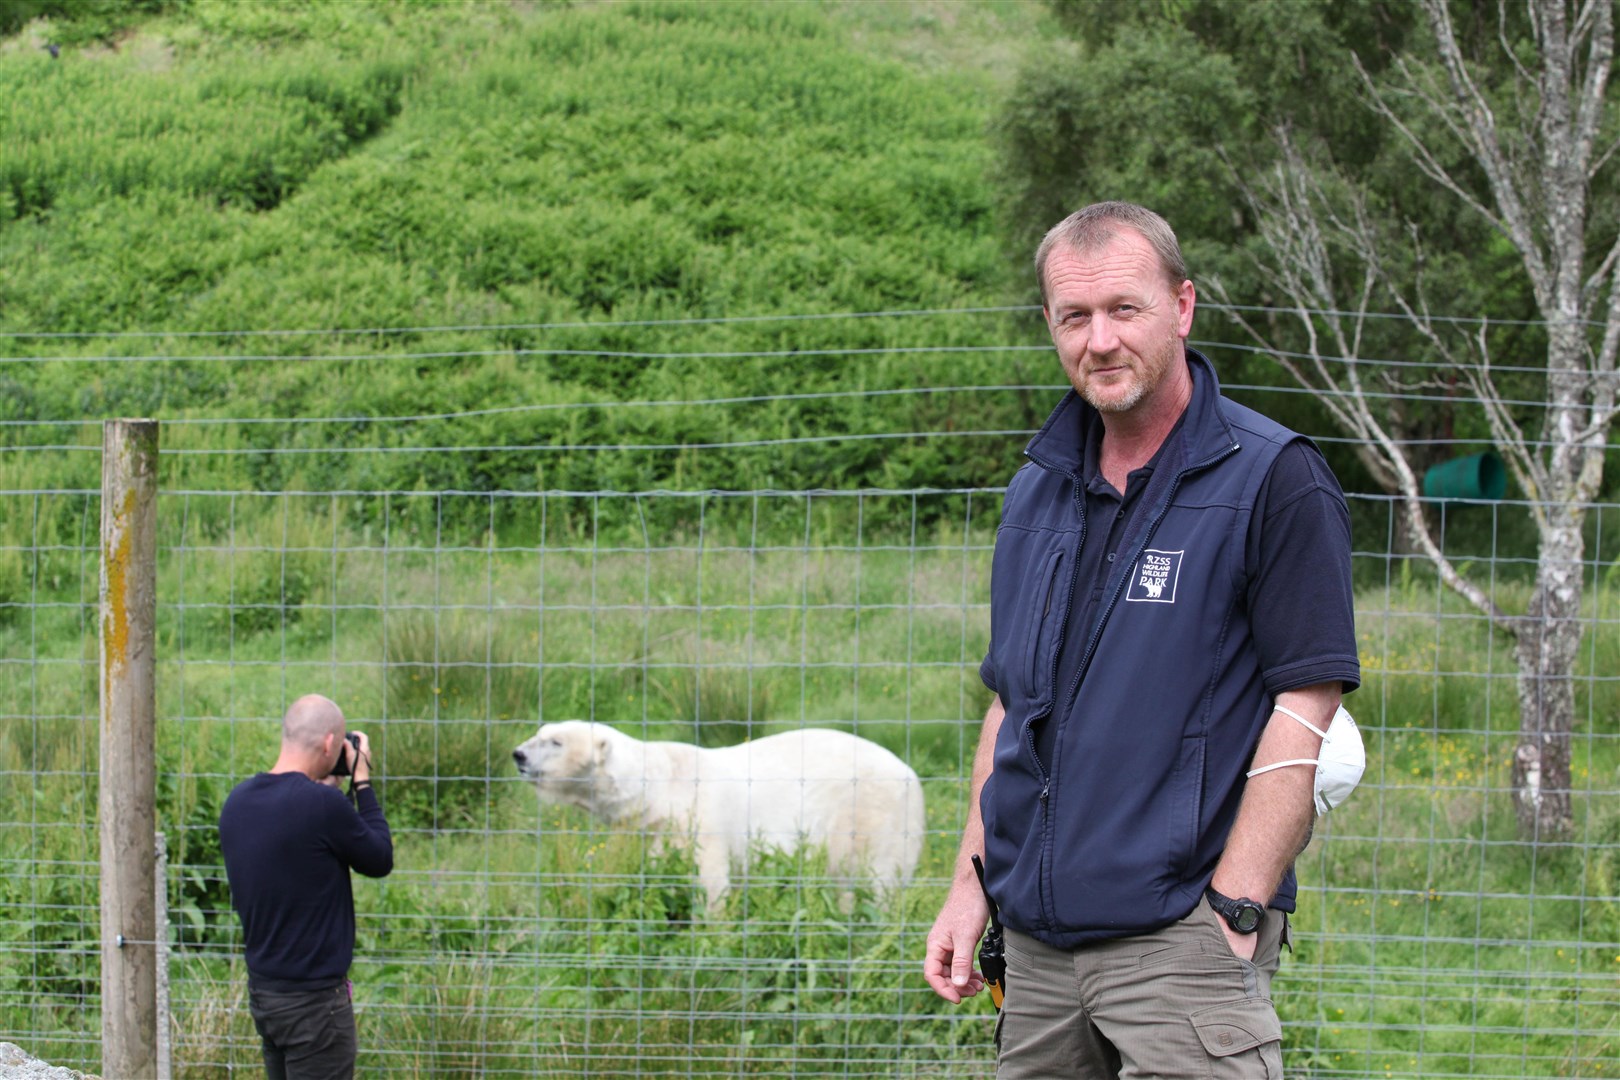 RZSS animal collections manager Keith Gilchrist in front of one of the wildlife park's two polar bear enclosures.